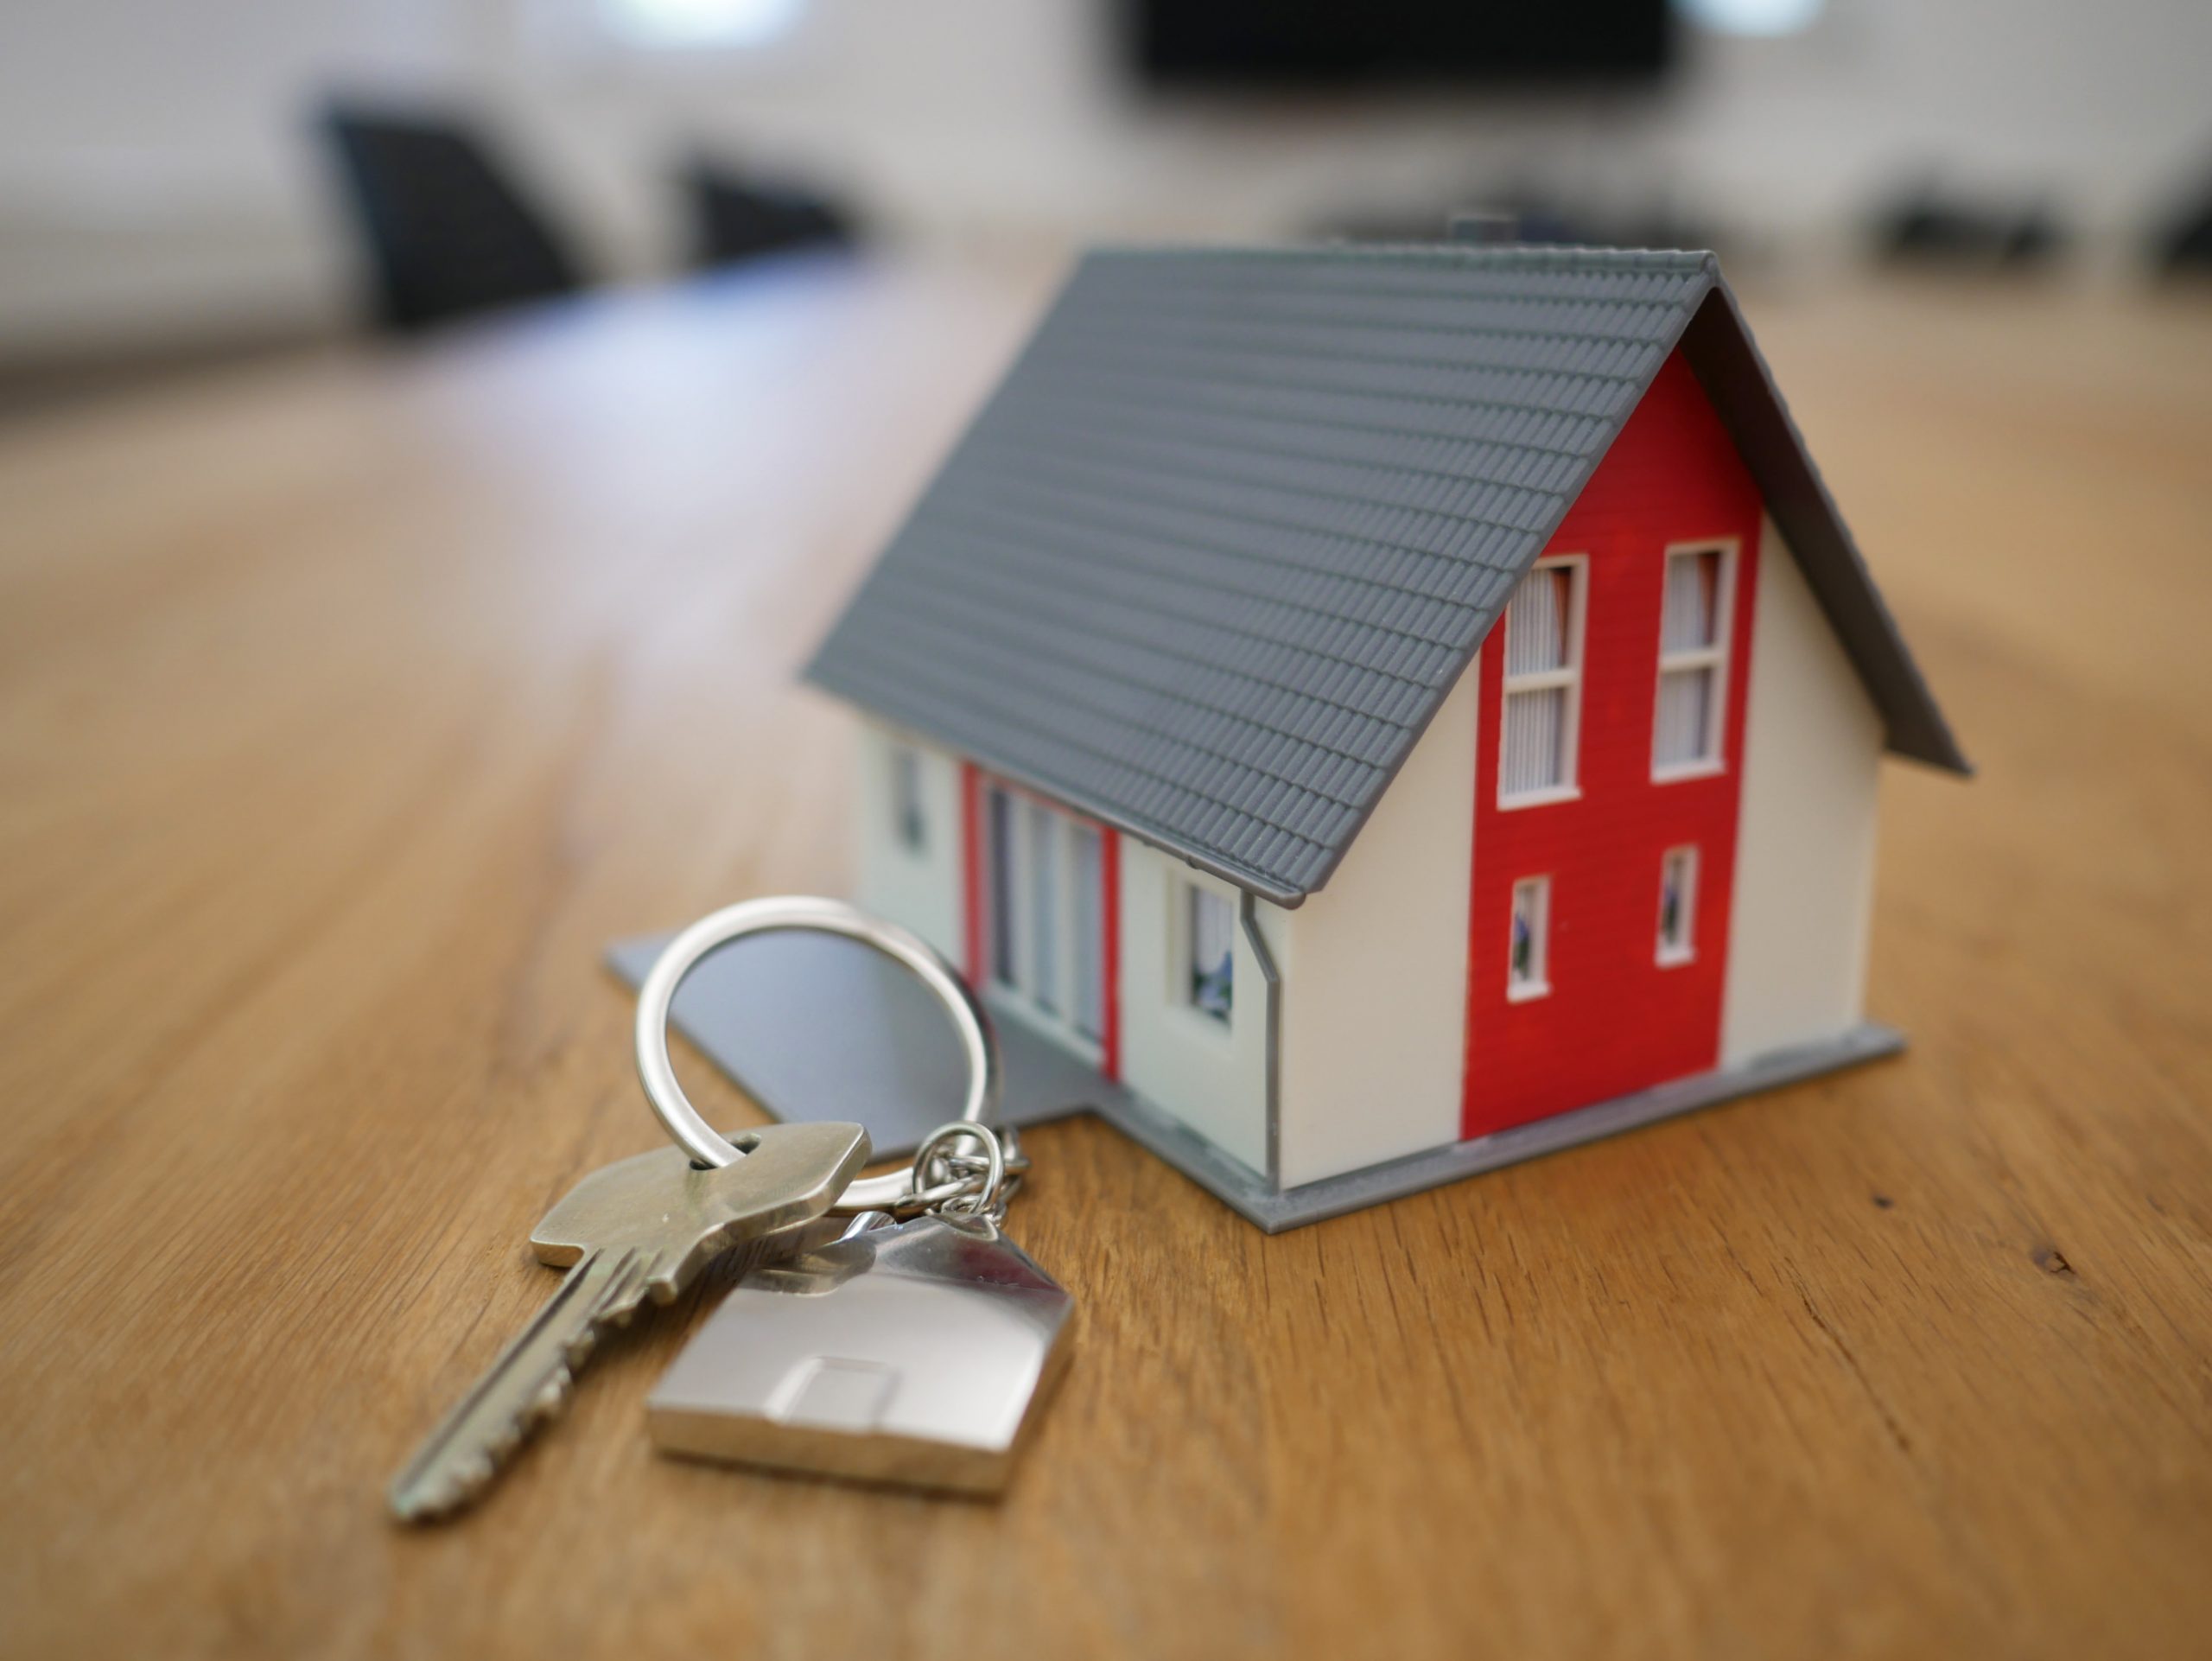 A house model painted gray, white, and red with a key next to it.